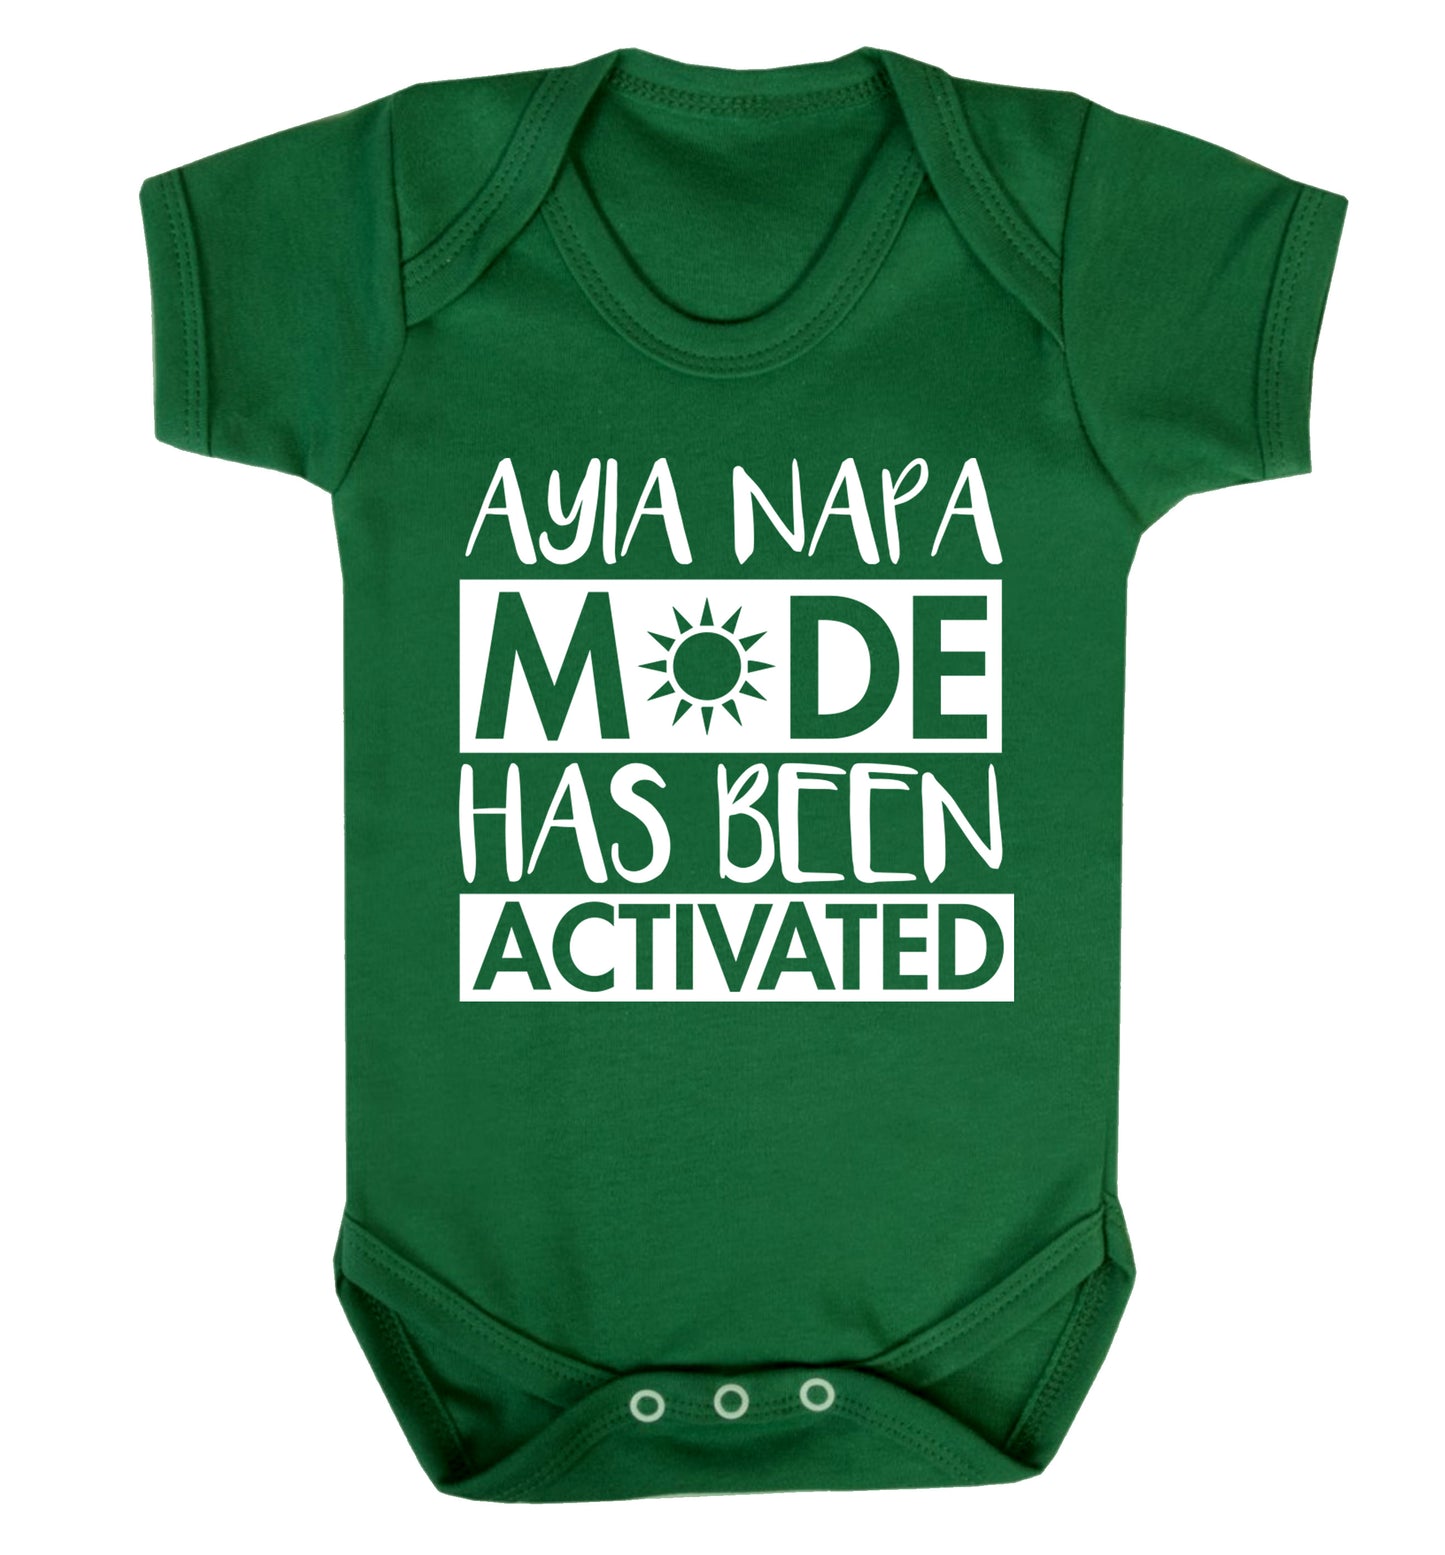 Ayia Napa mode has been activated Baby Vest green 18-24 months